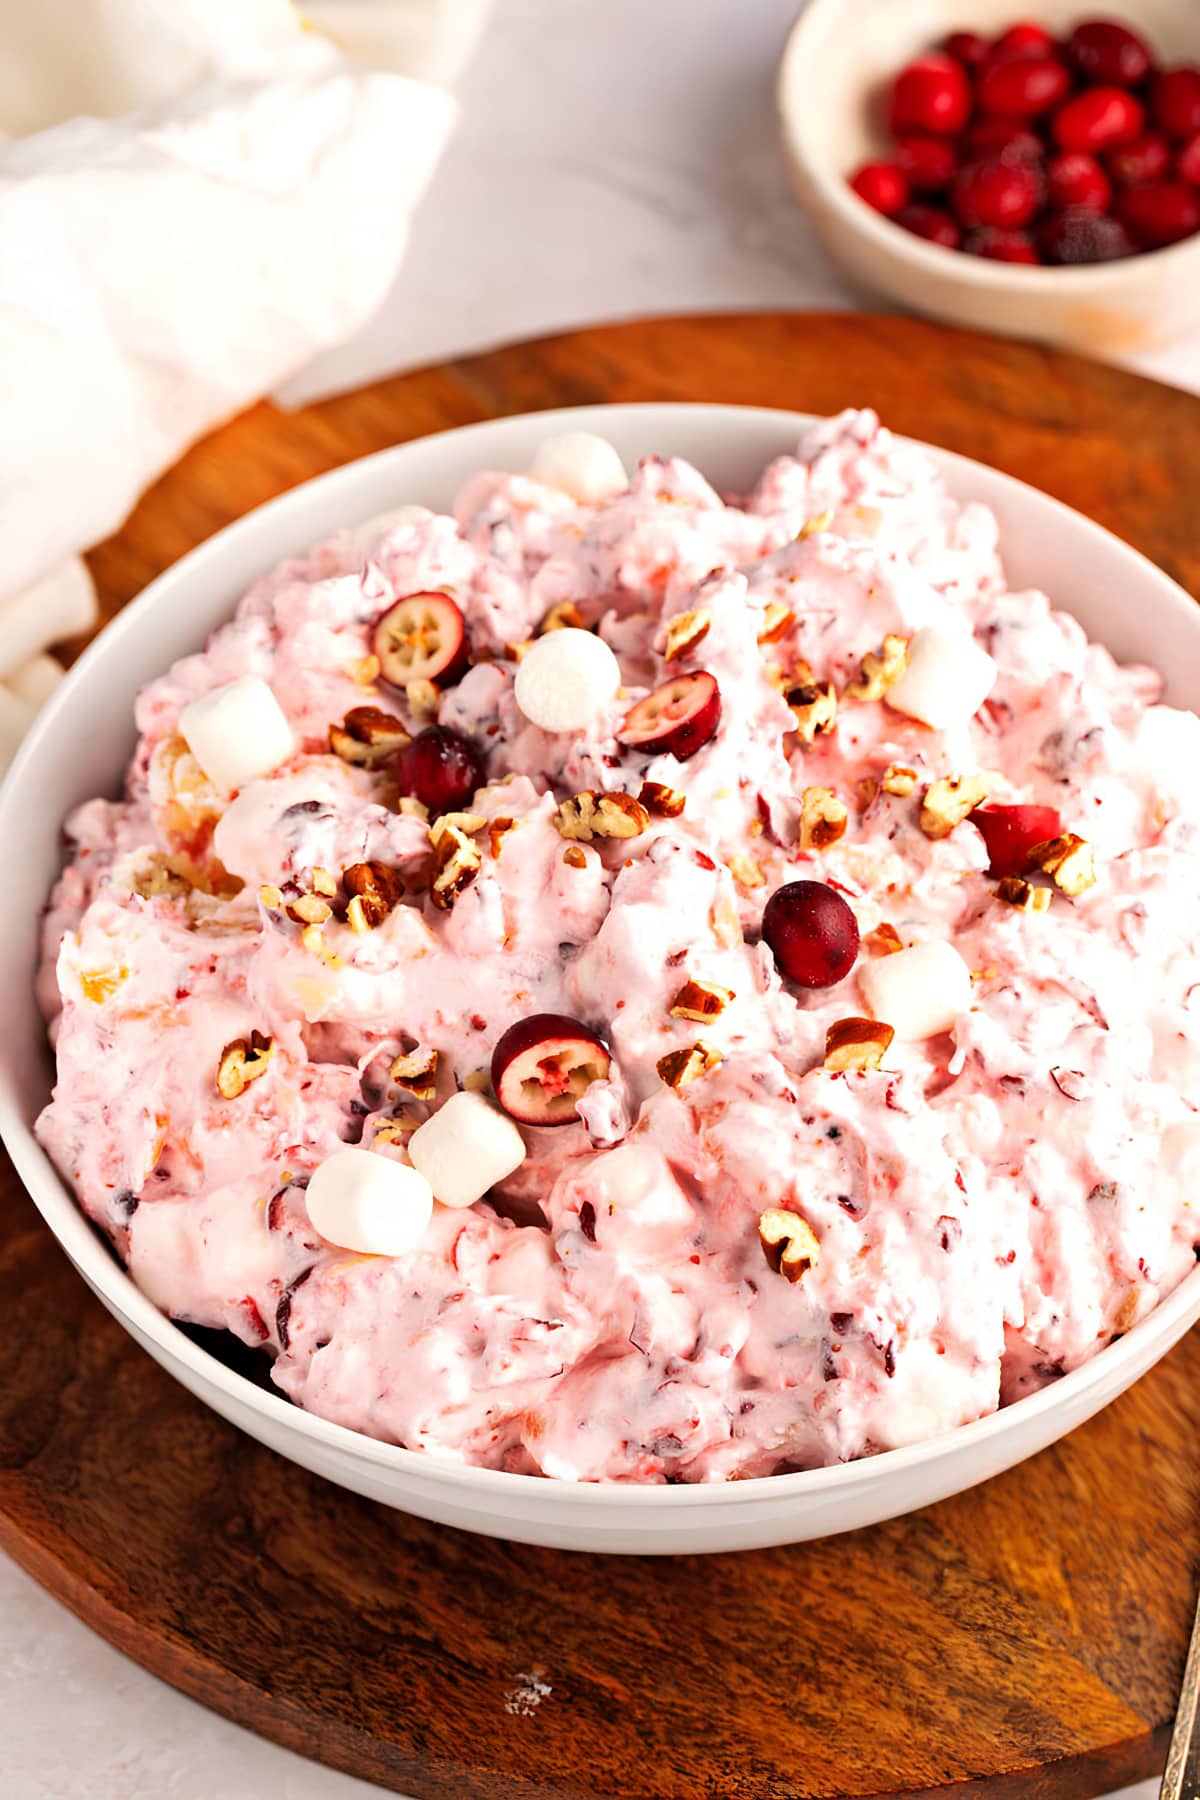 A bowl of cranberry fluff with marshmallows and nuts, a delightful mix of flavors and textures